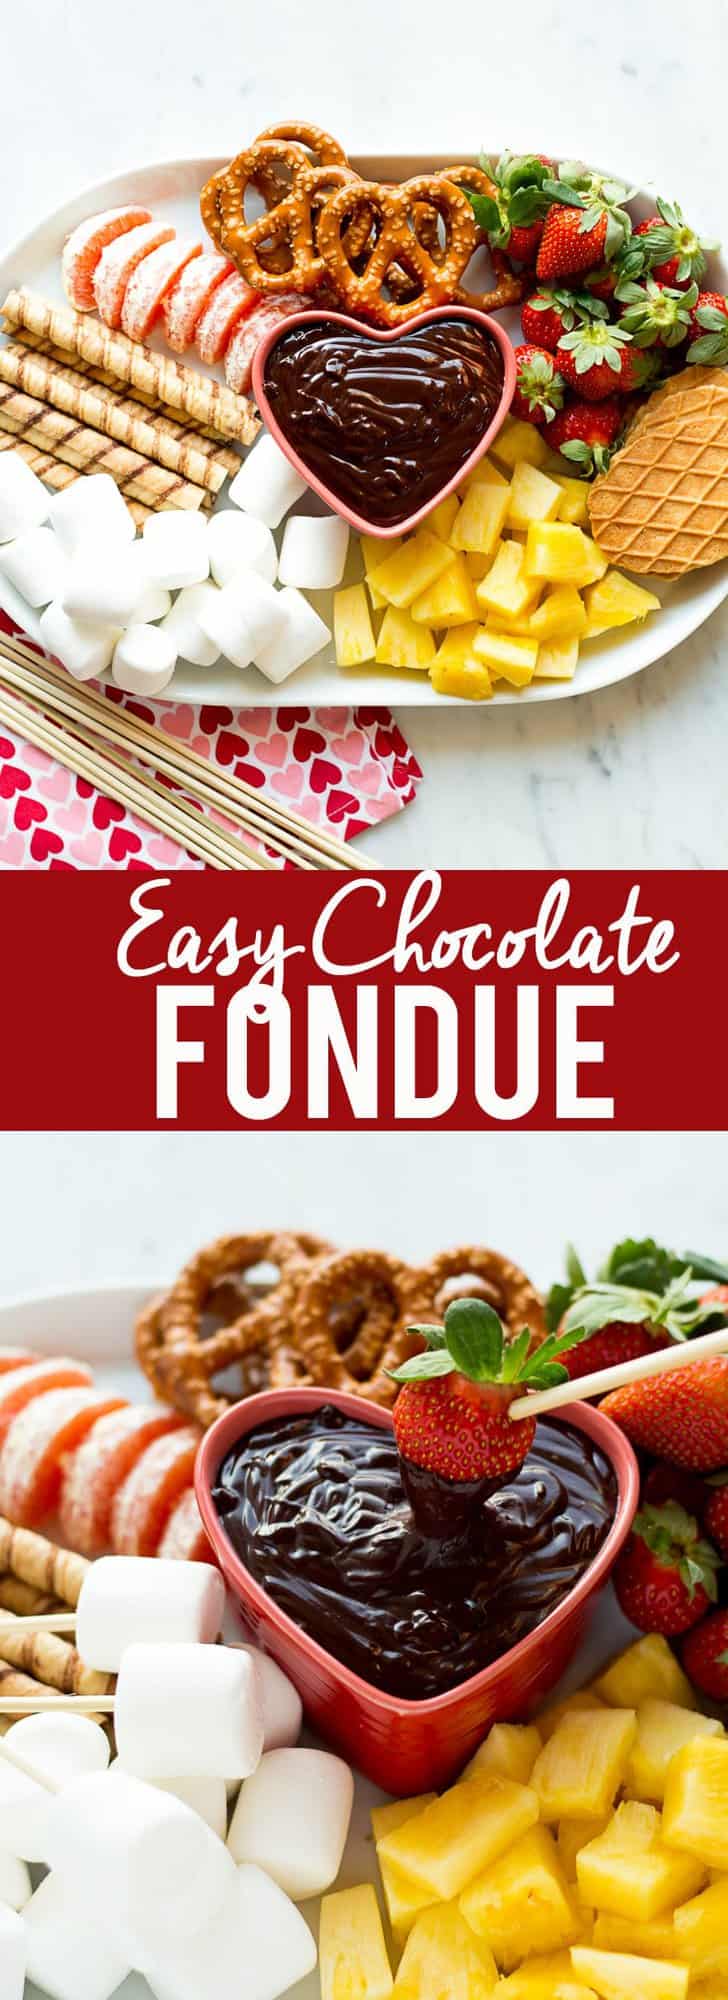 This easy chocolate fondue is a fun dessert for a romantic valentine's day dinner or party. It is rich and chocolaty and doesn't even require a fondue pot!